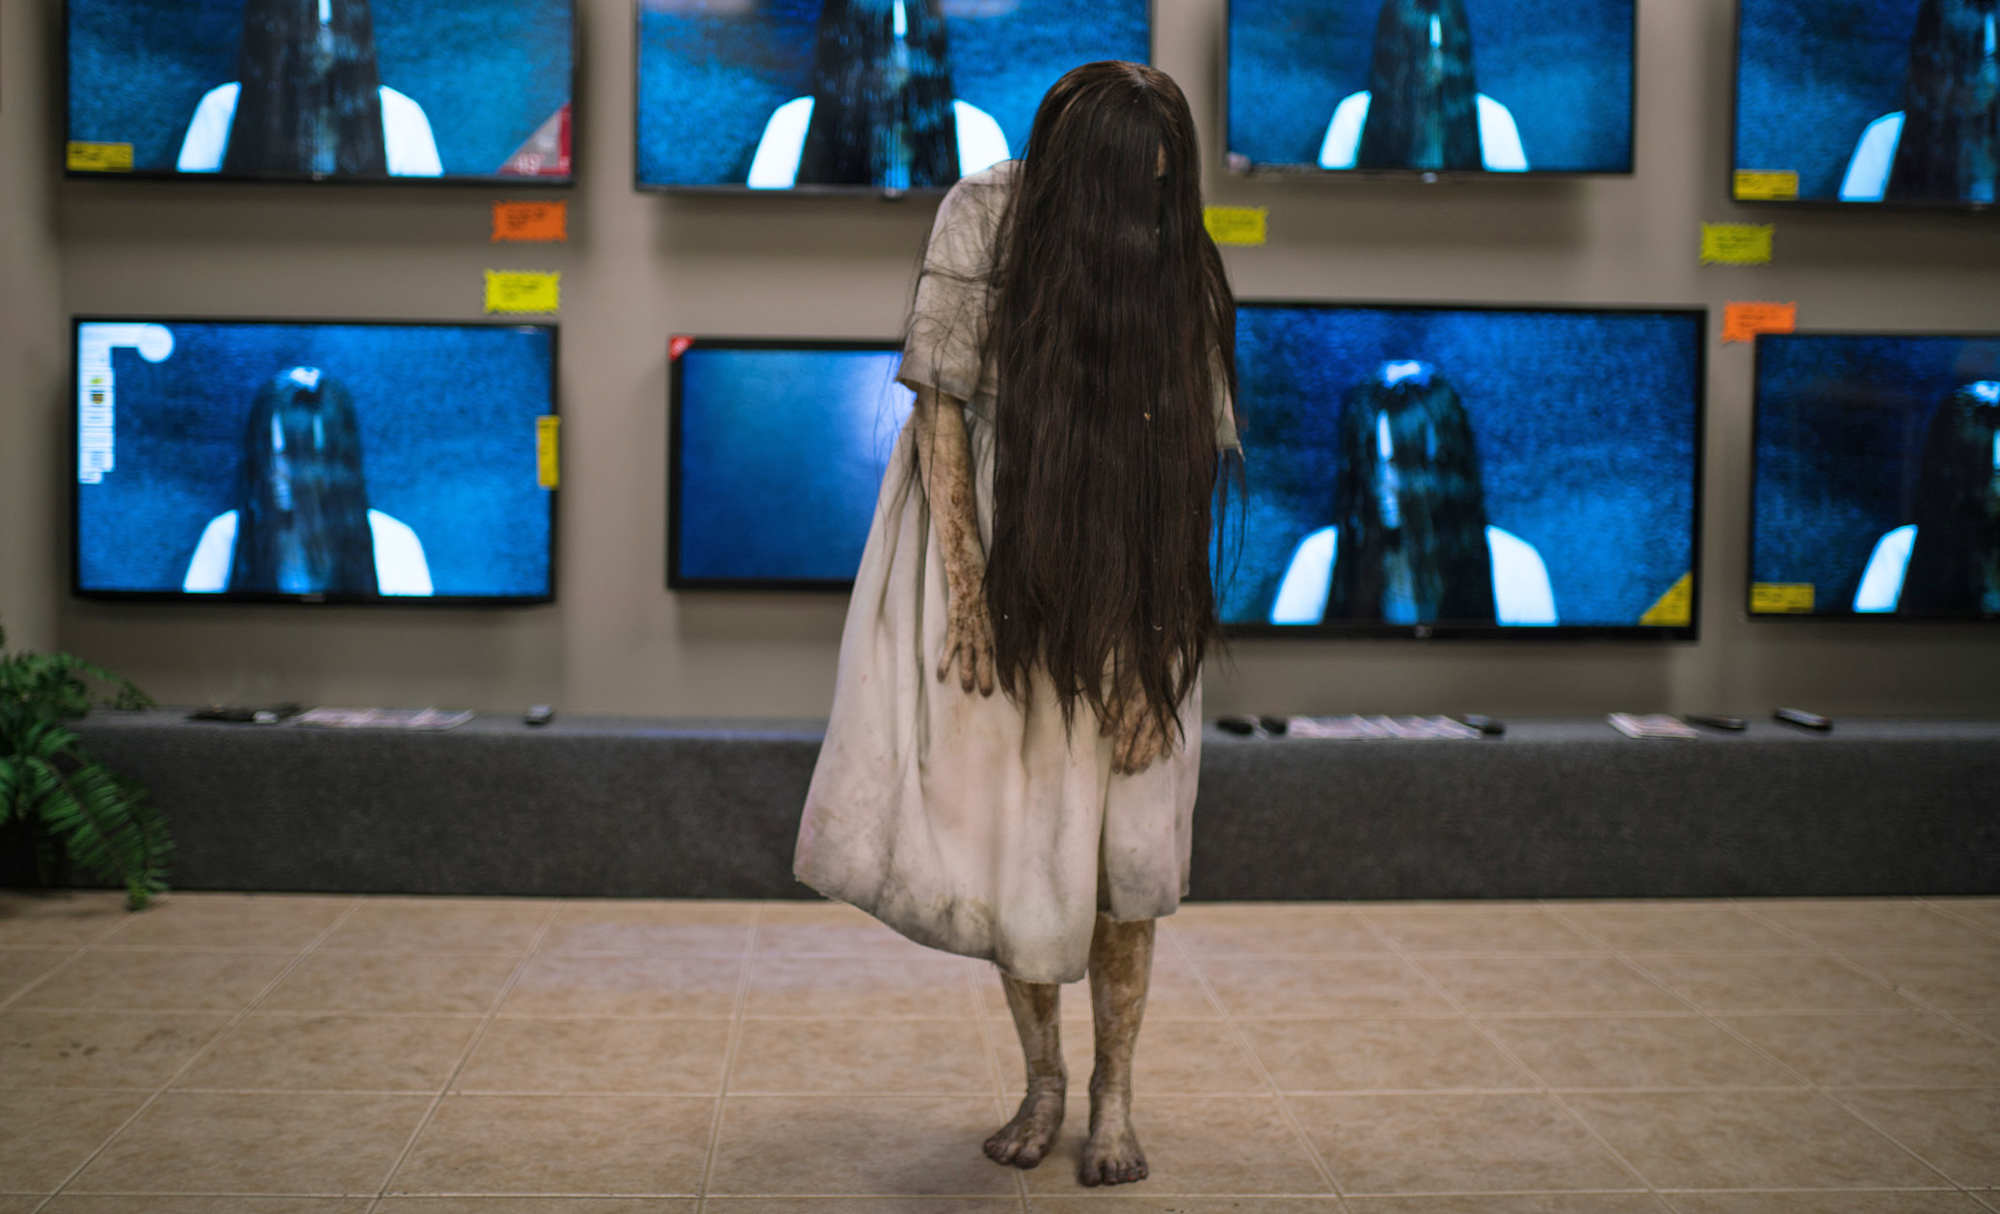 Watch The Ring Girl Crawl Out Of An Electronics Store TV To Terrify Shoppers